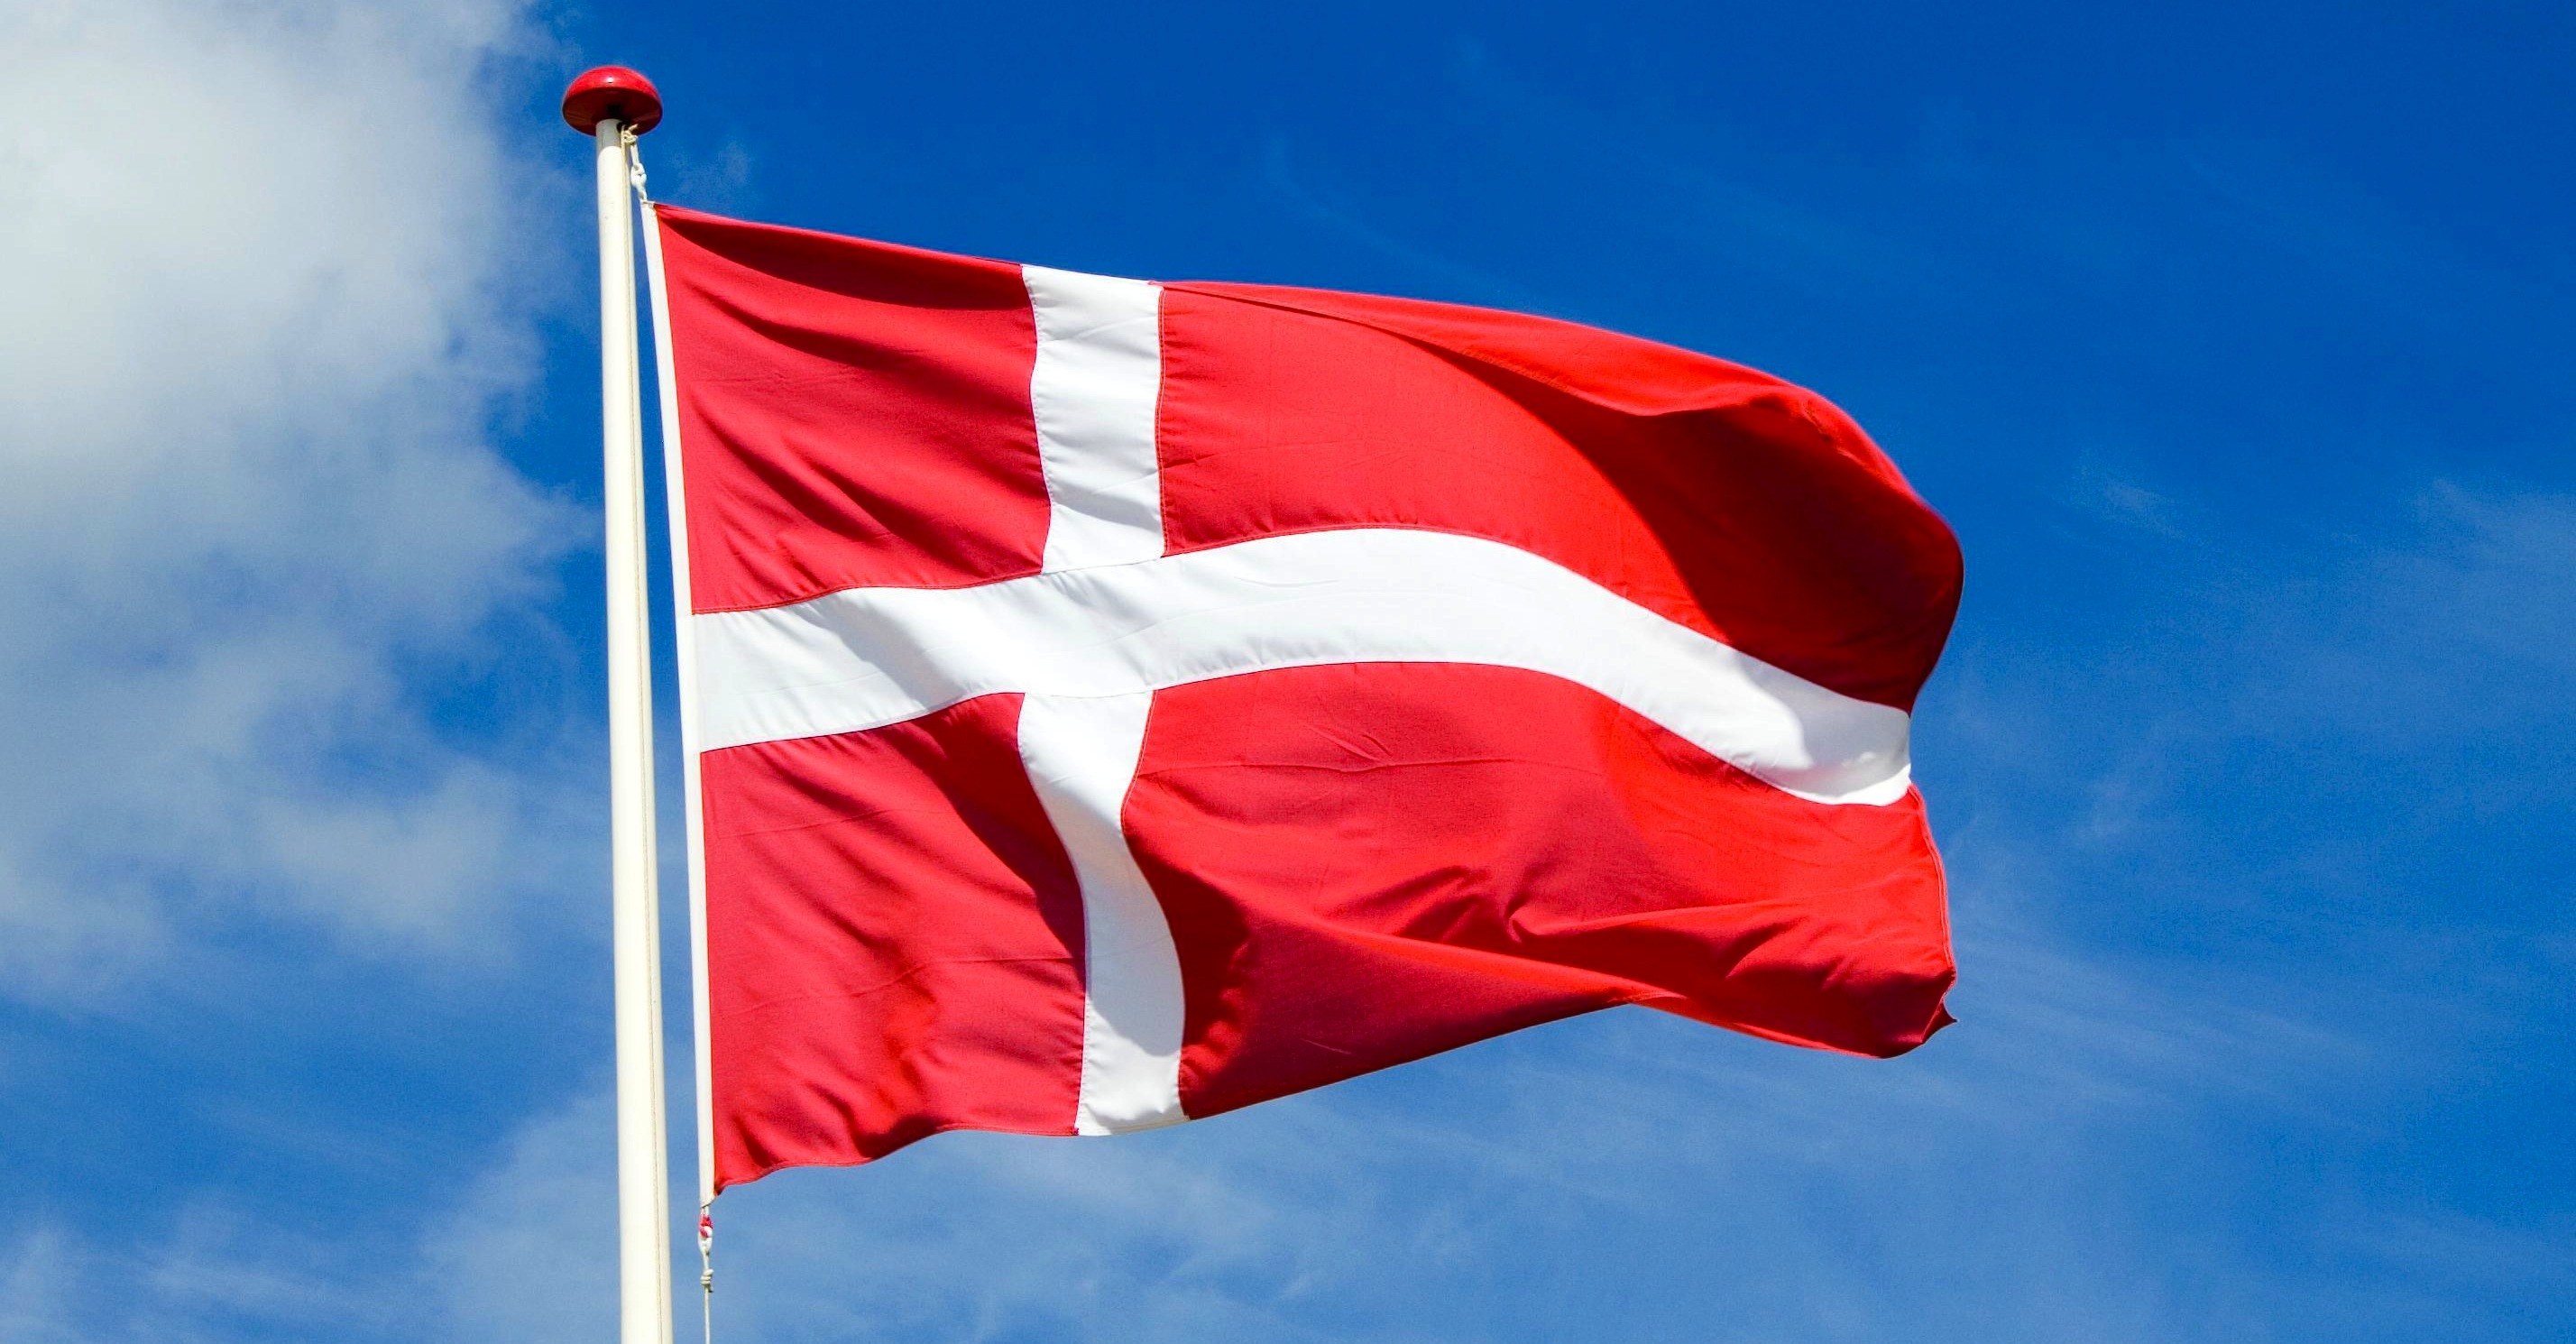 Denmark to declassify being trans as mental illness